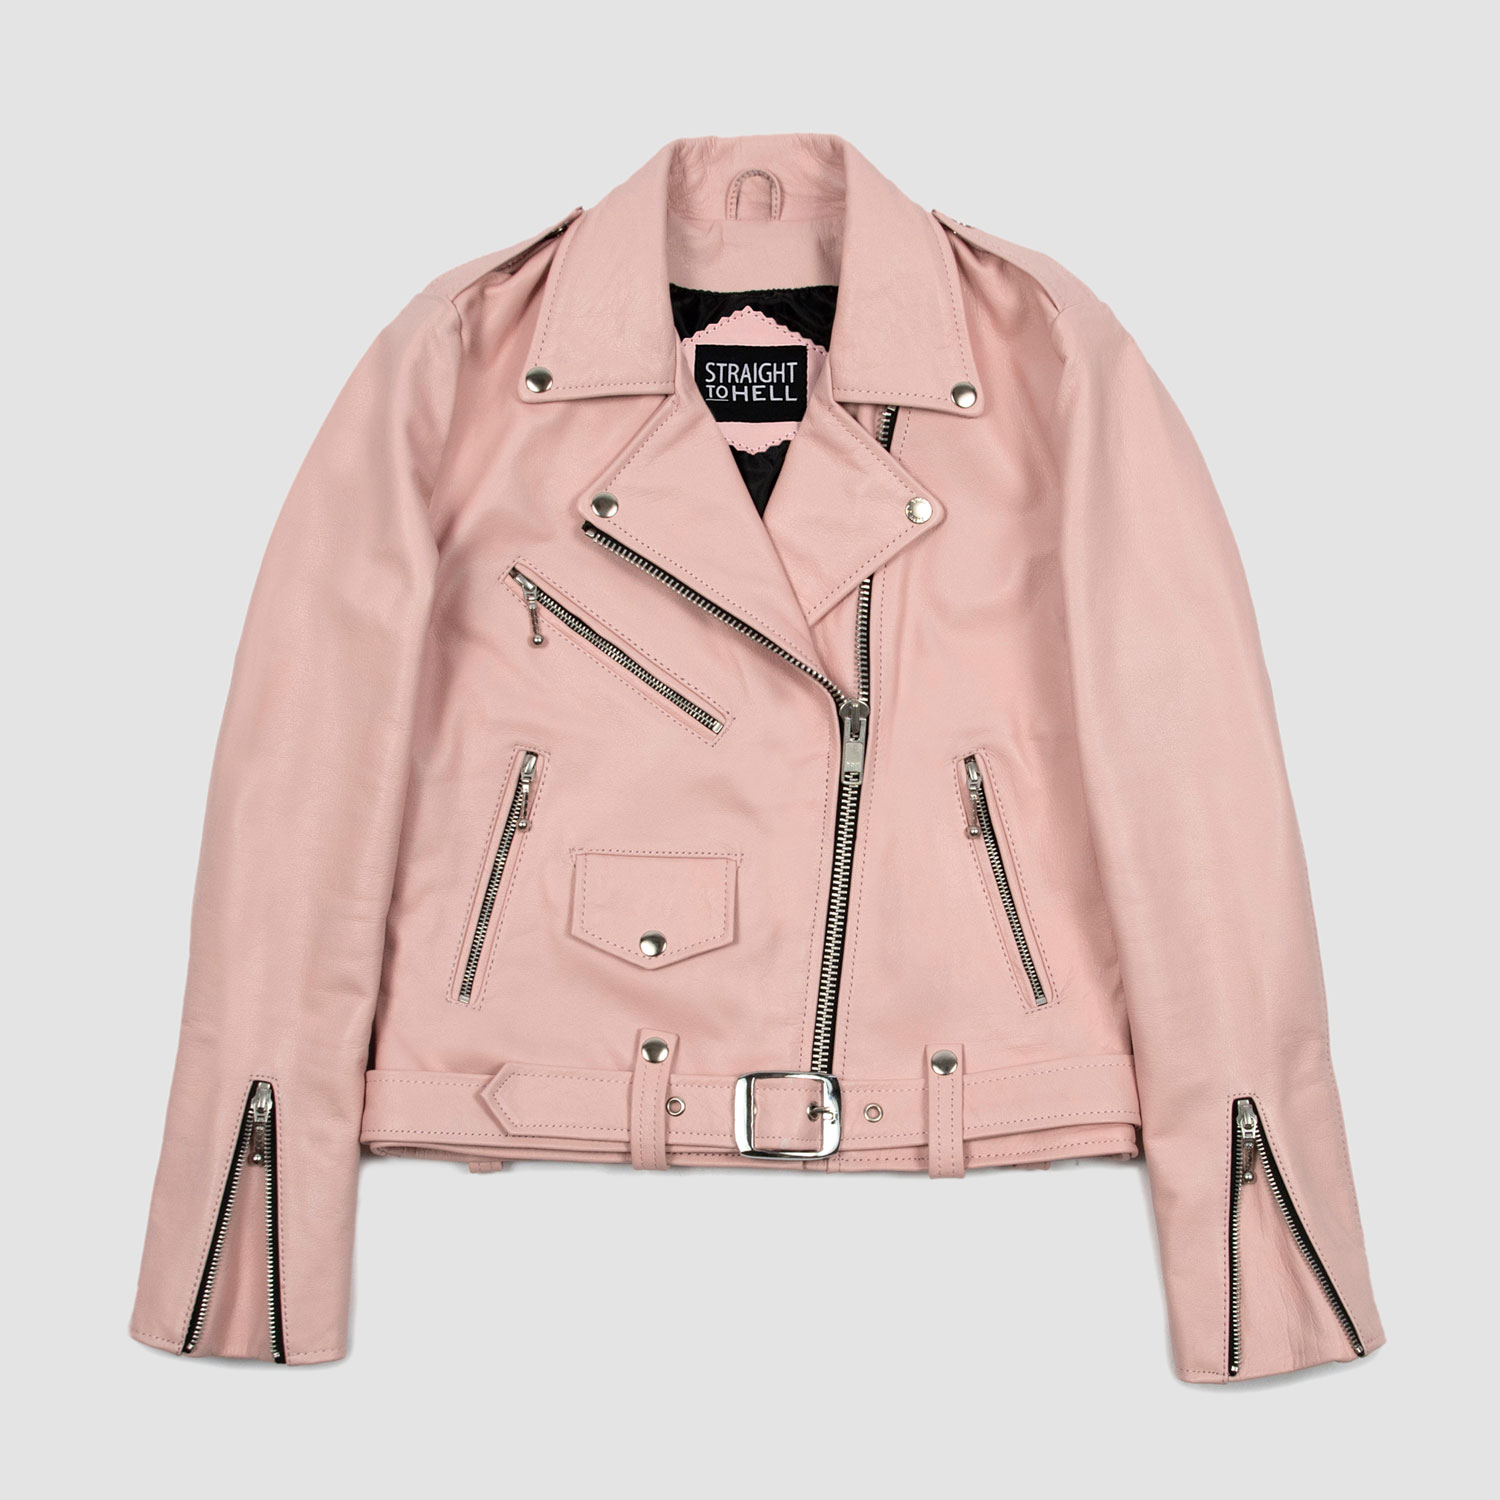 Commando - Dusty Pink Leather Jacket (Size XS, S, M, L, XL, 2XL, 3XL, 4XL)  | Straight To Hell Apparel